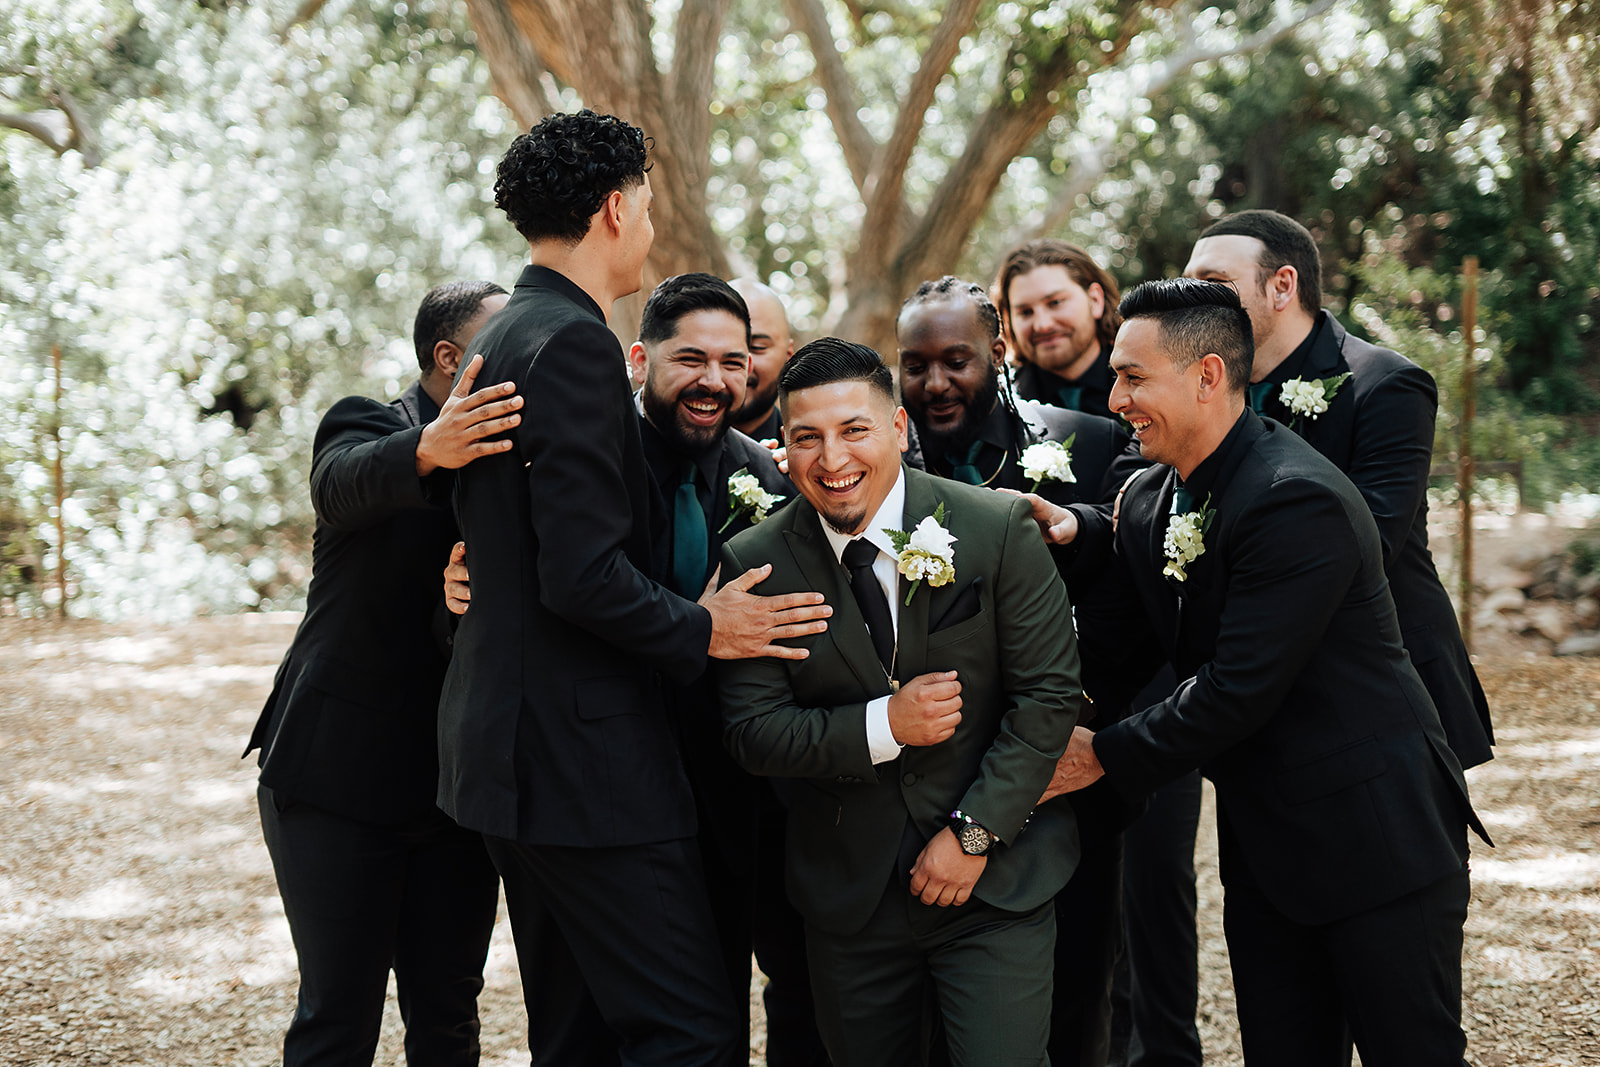 The groomsmen gathered for fun and unposed portraits at this southern california venue Oak Canyon nature center